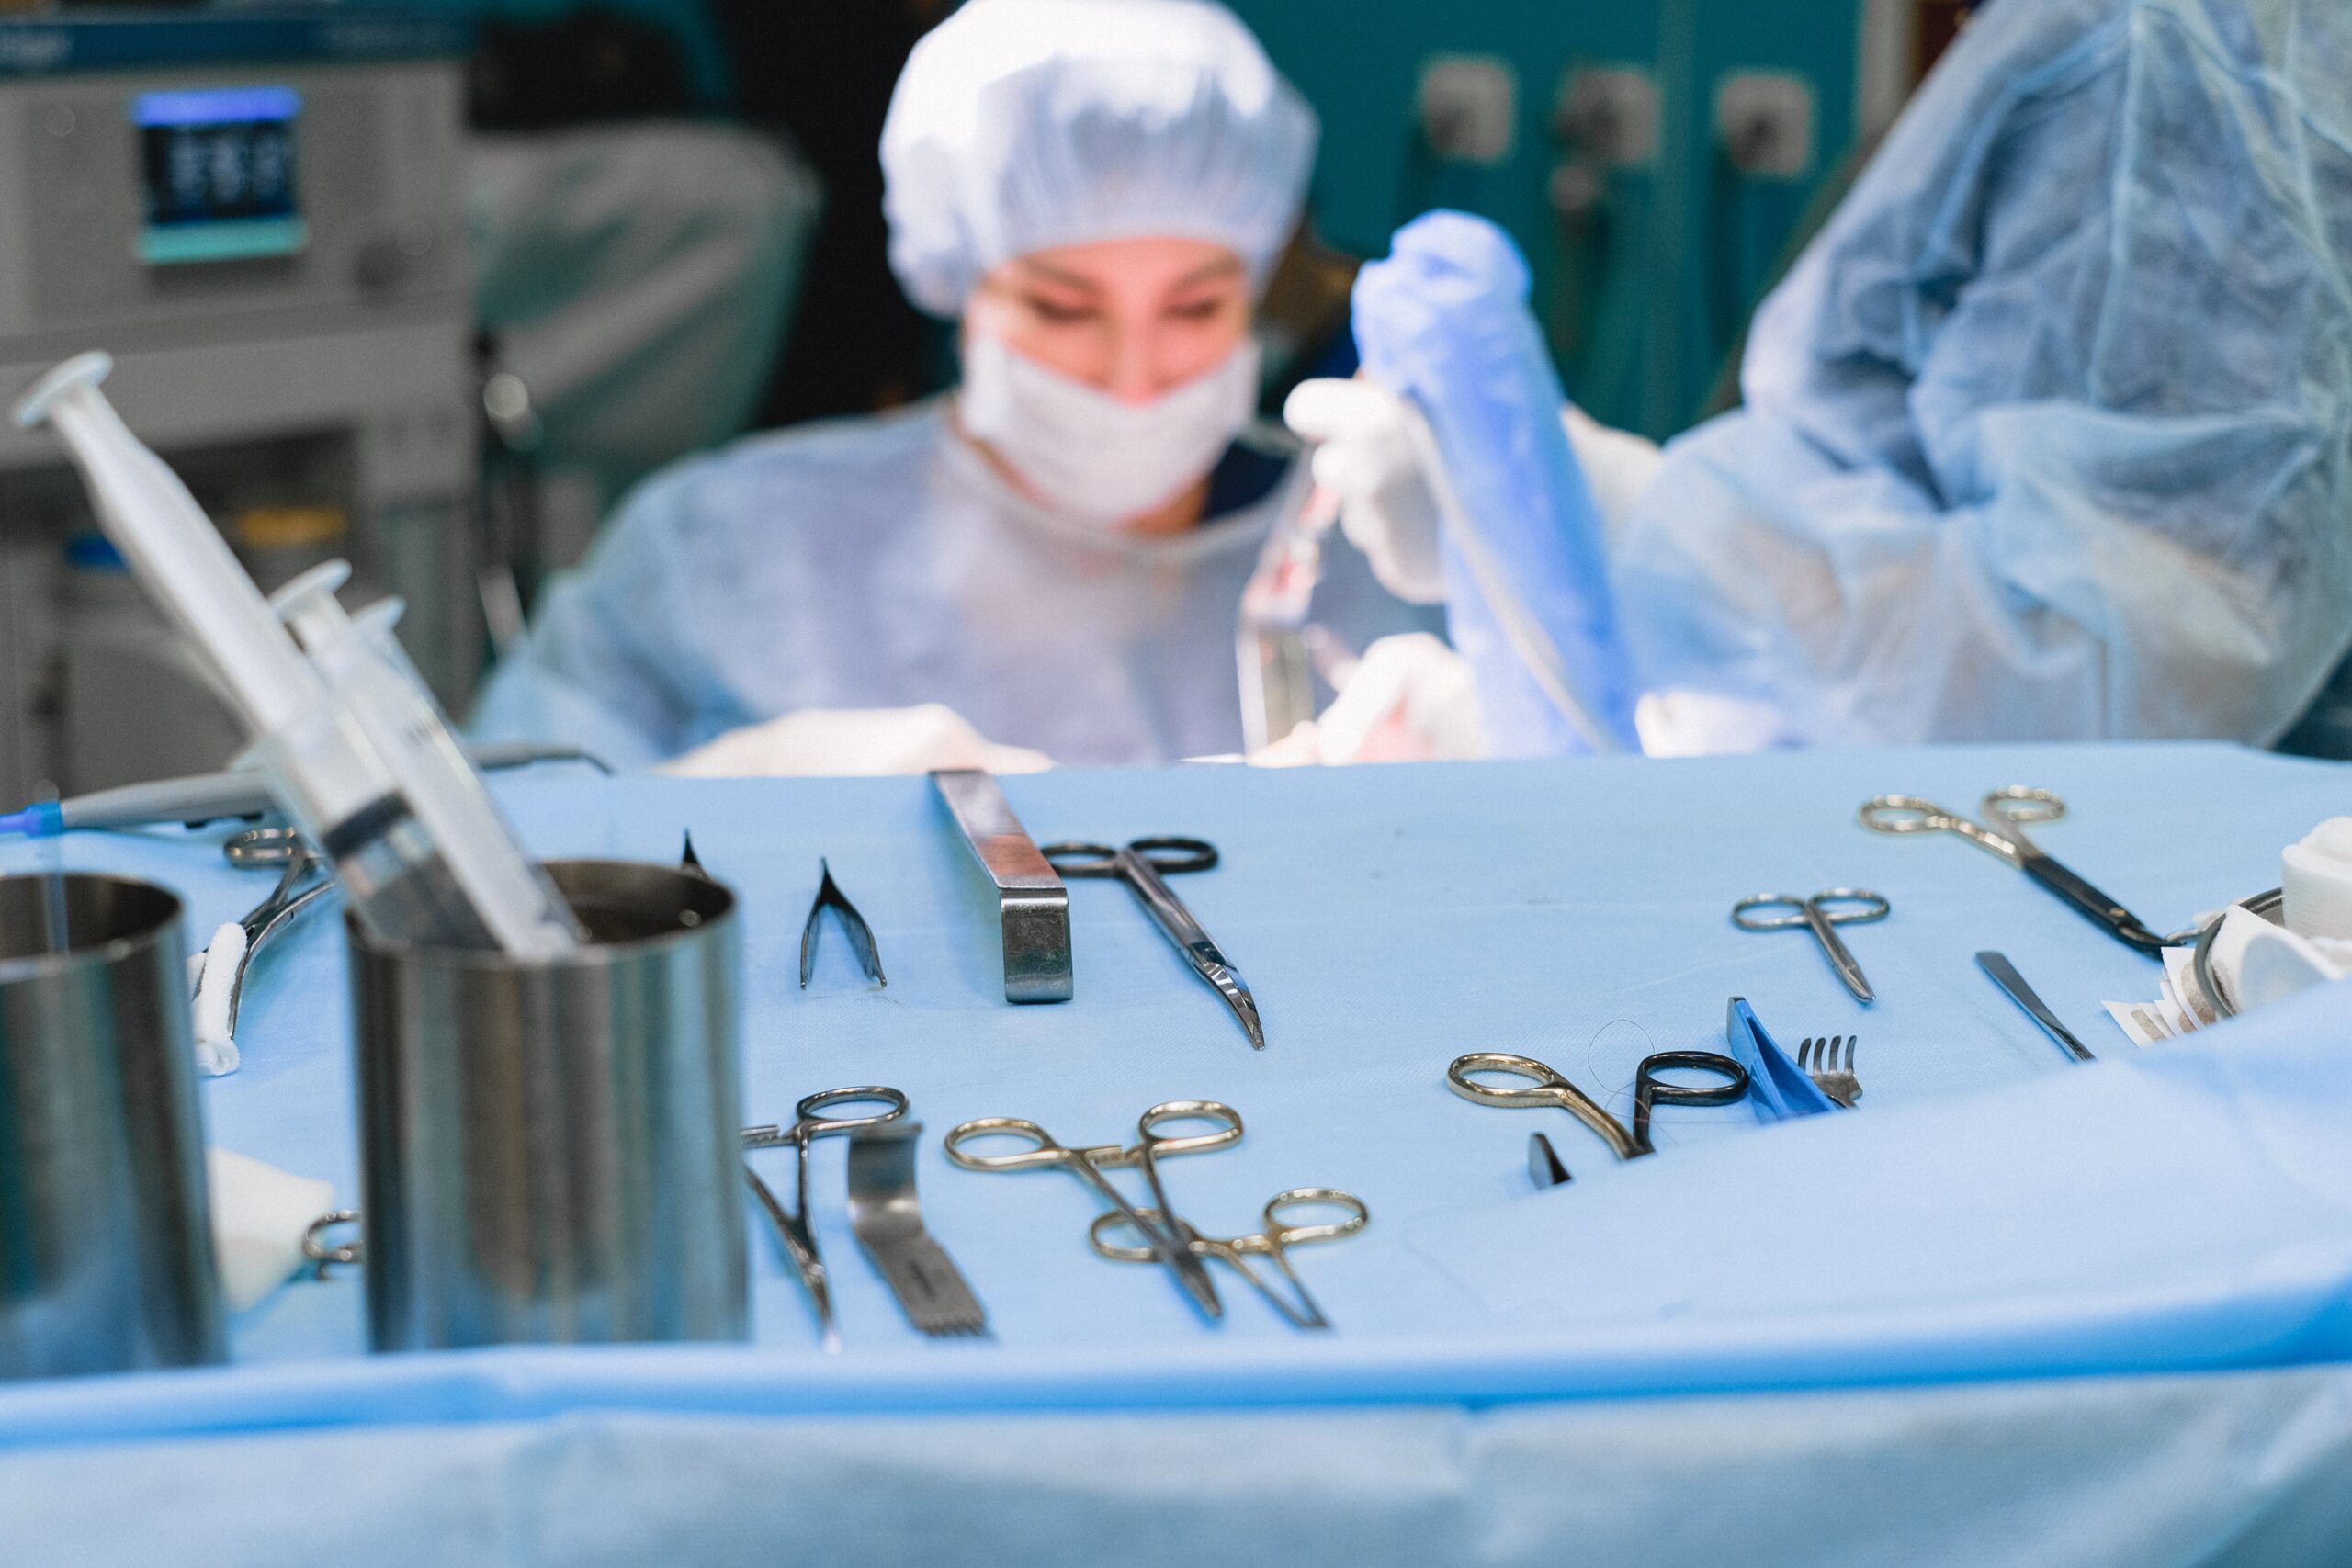 Surgeons operating inside an operating room